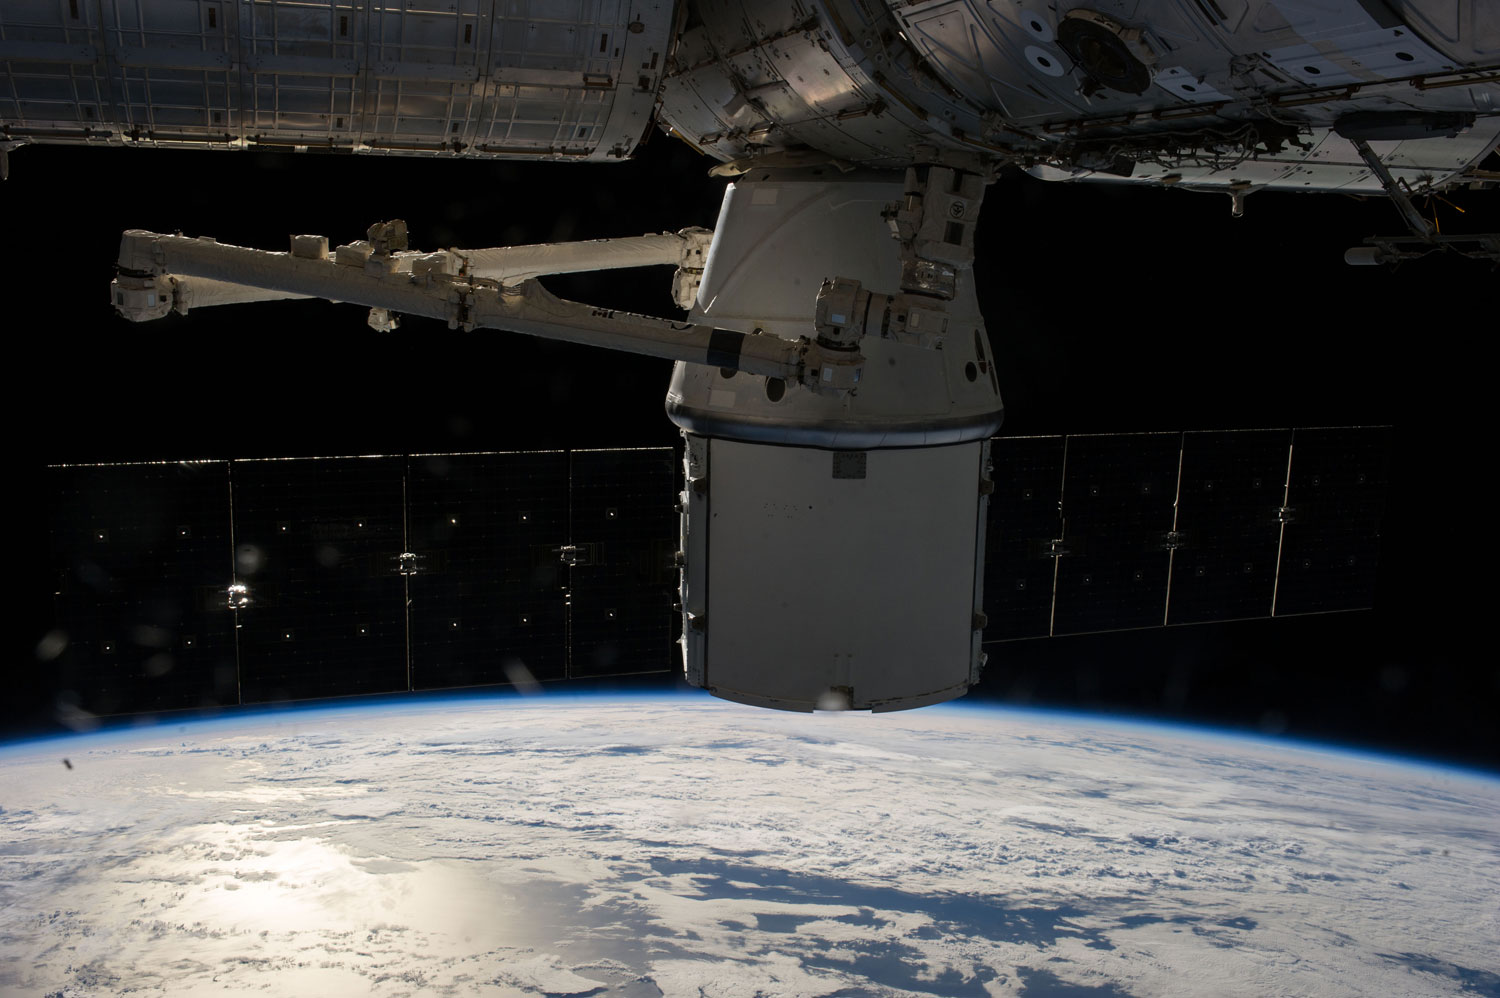 The SpaceX Dragon capsule is berthed at the International Space Station on April 20, 2014 as photographed by the ISS crew members.